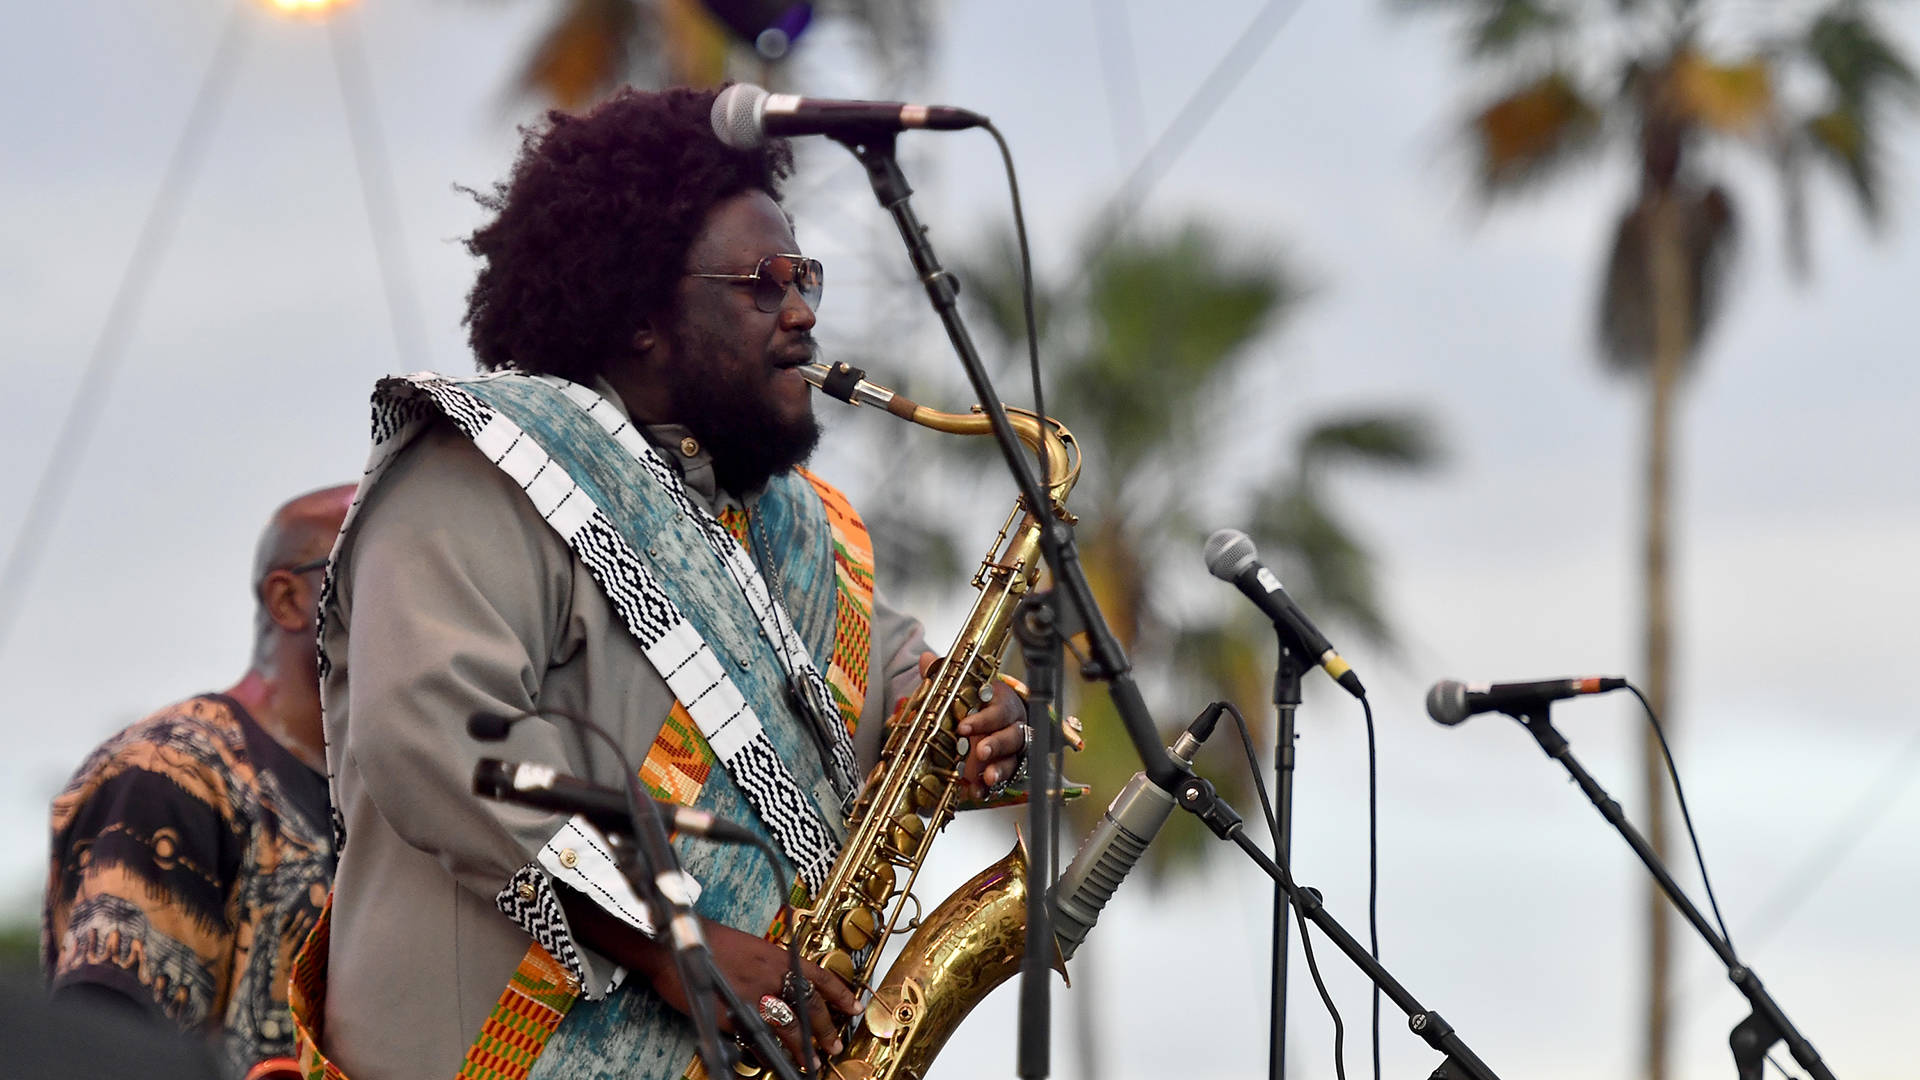 Kamasi Washington performs at the 2018 Coachella Valley Music and Arts Festival Weekend 1 at the Empire Polo Field on April 15, 2018 in Indio, California.   Frazer Harrison/Getty Images for Coachella